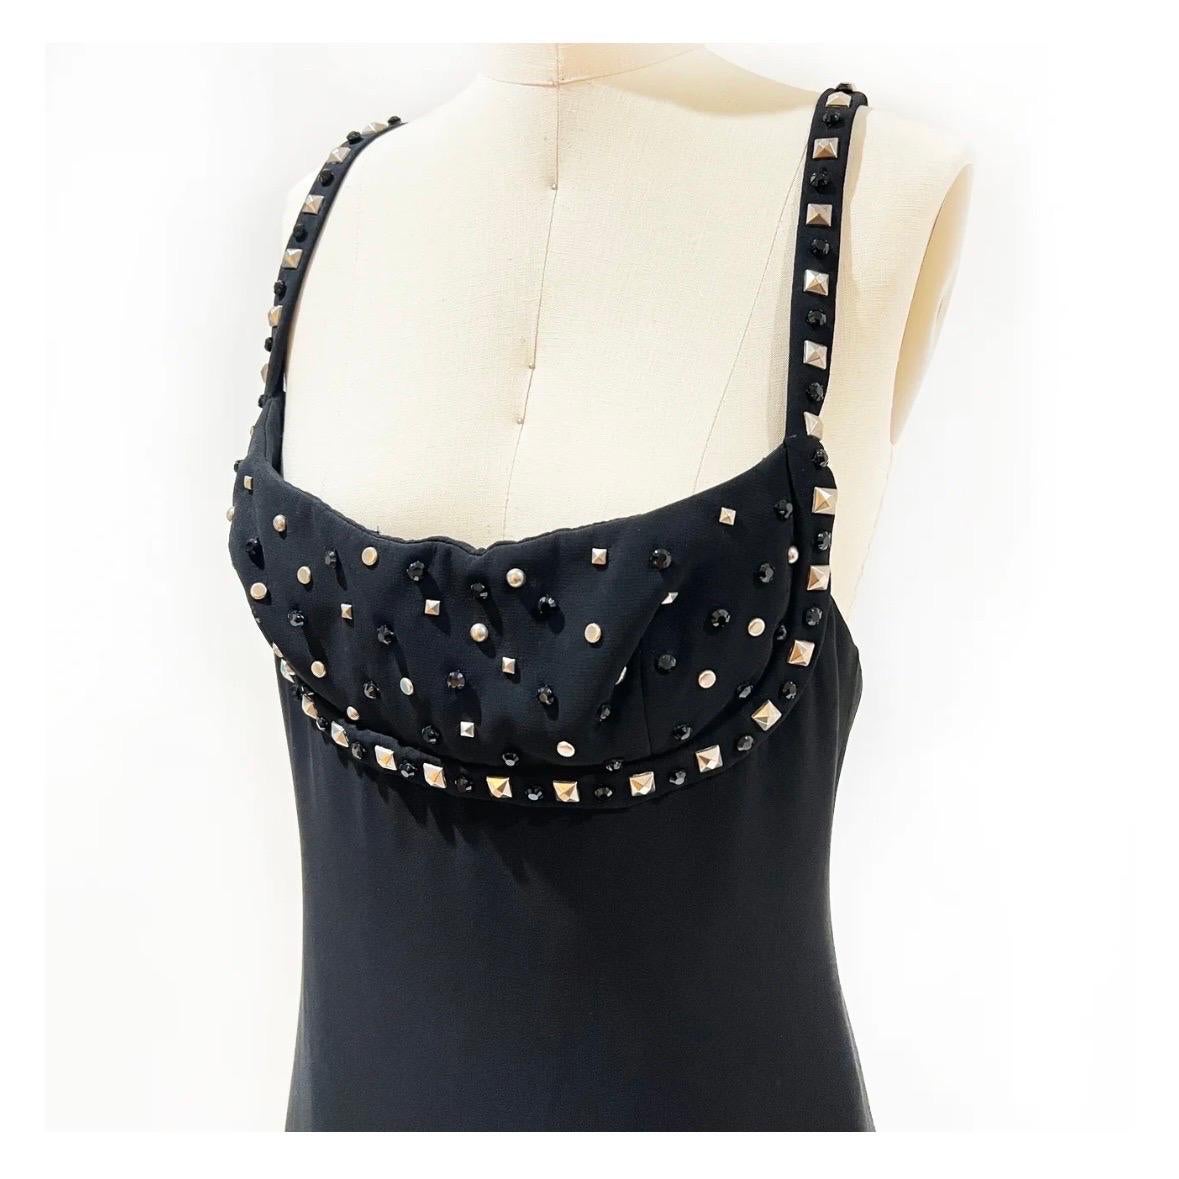 Vintage black studded gown by Gianni Versace Couture
Fall/Winter 1998 Ready-to-Wear
Made in Italy
Black 
Silver-metal stud embellished bust and straps 
Black crystals intermixed with studs 
Back zipper closure 
Attached mesh bodysuit lining inside